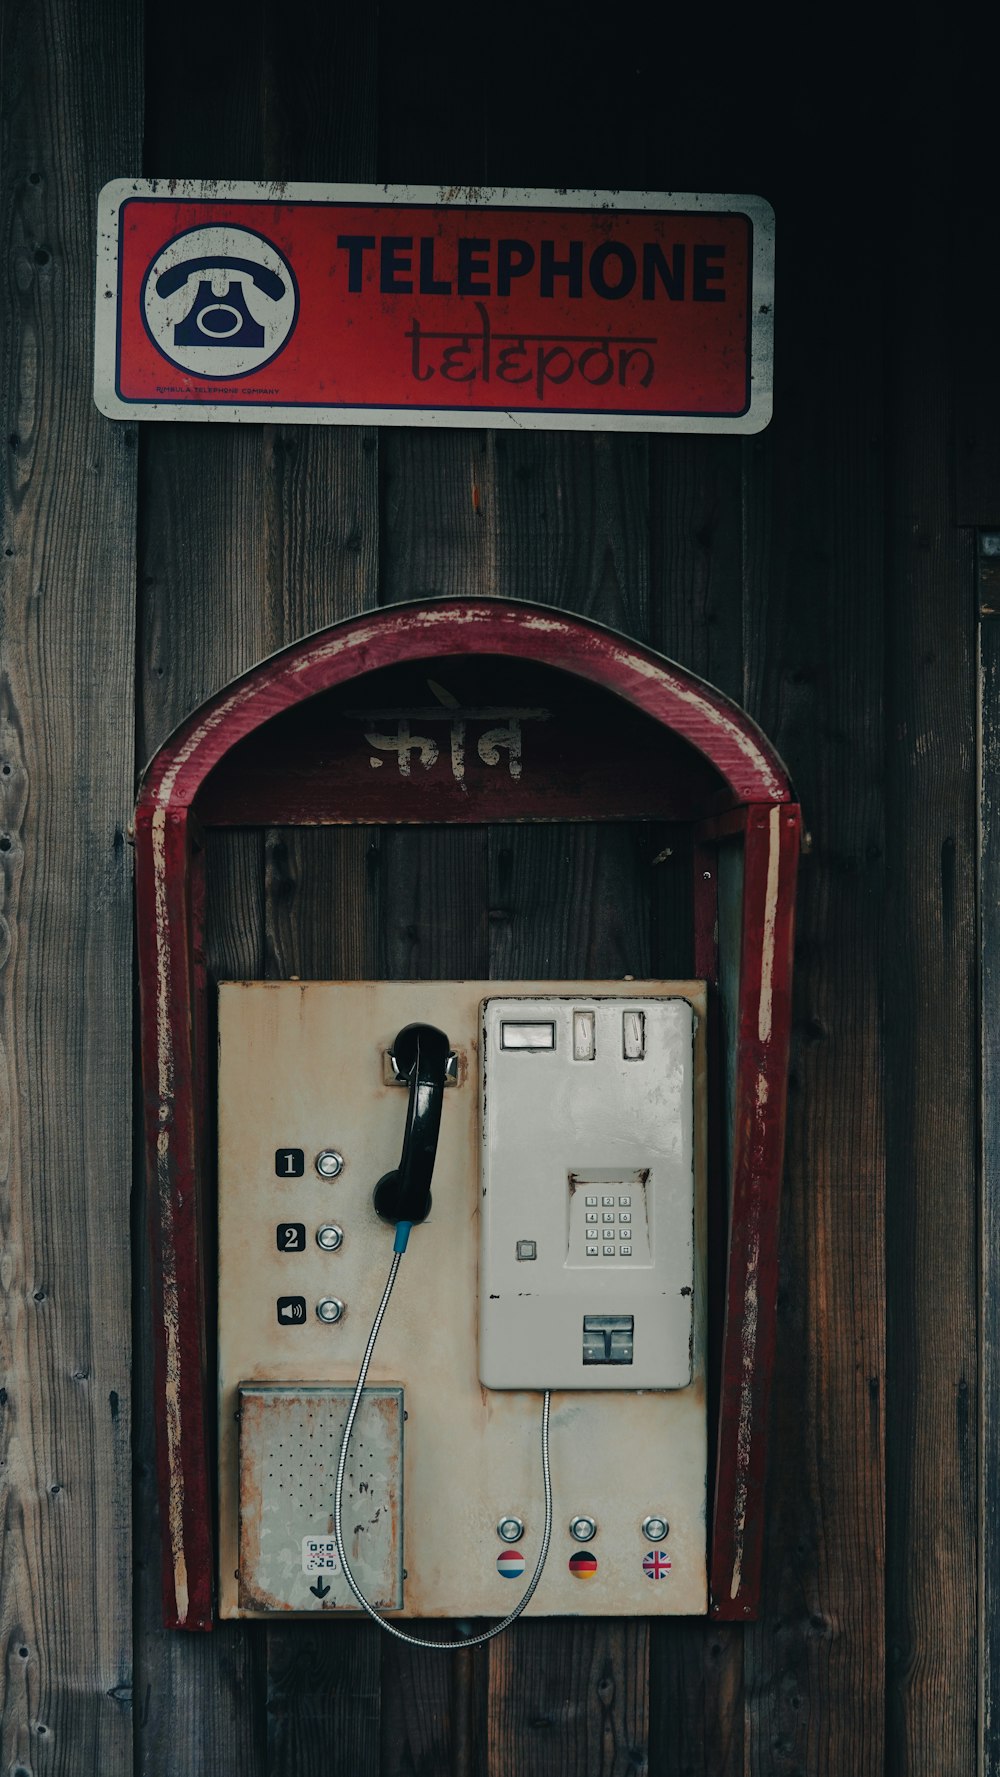 an old phone booth with a telephone on it